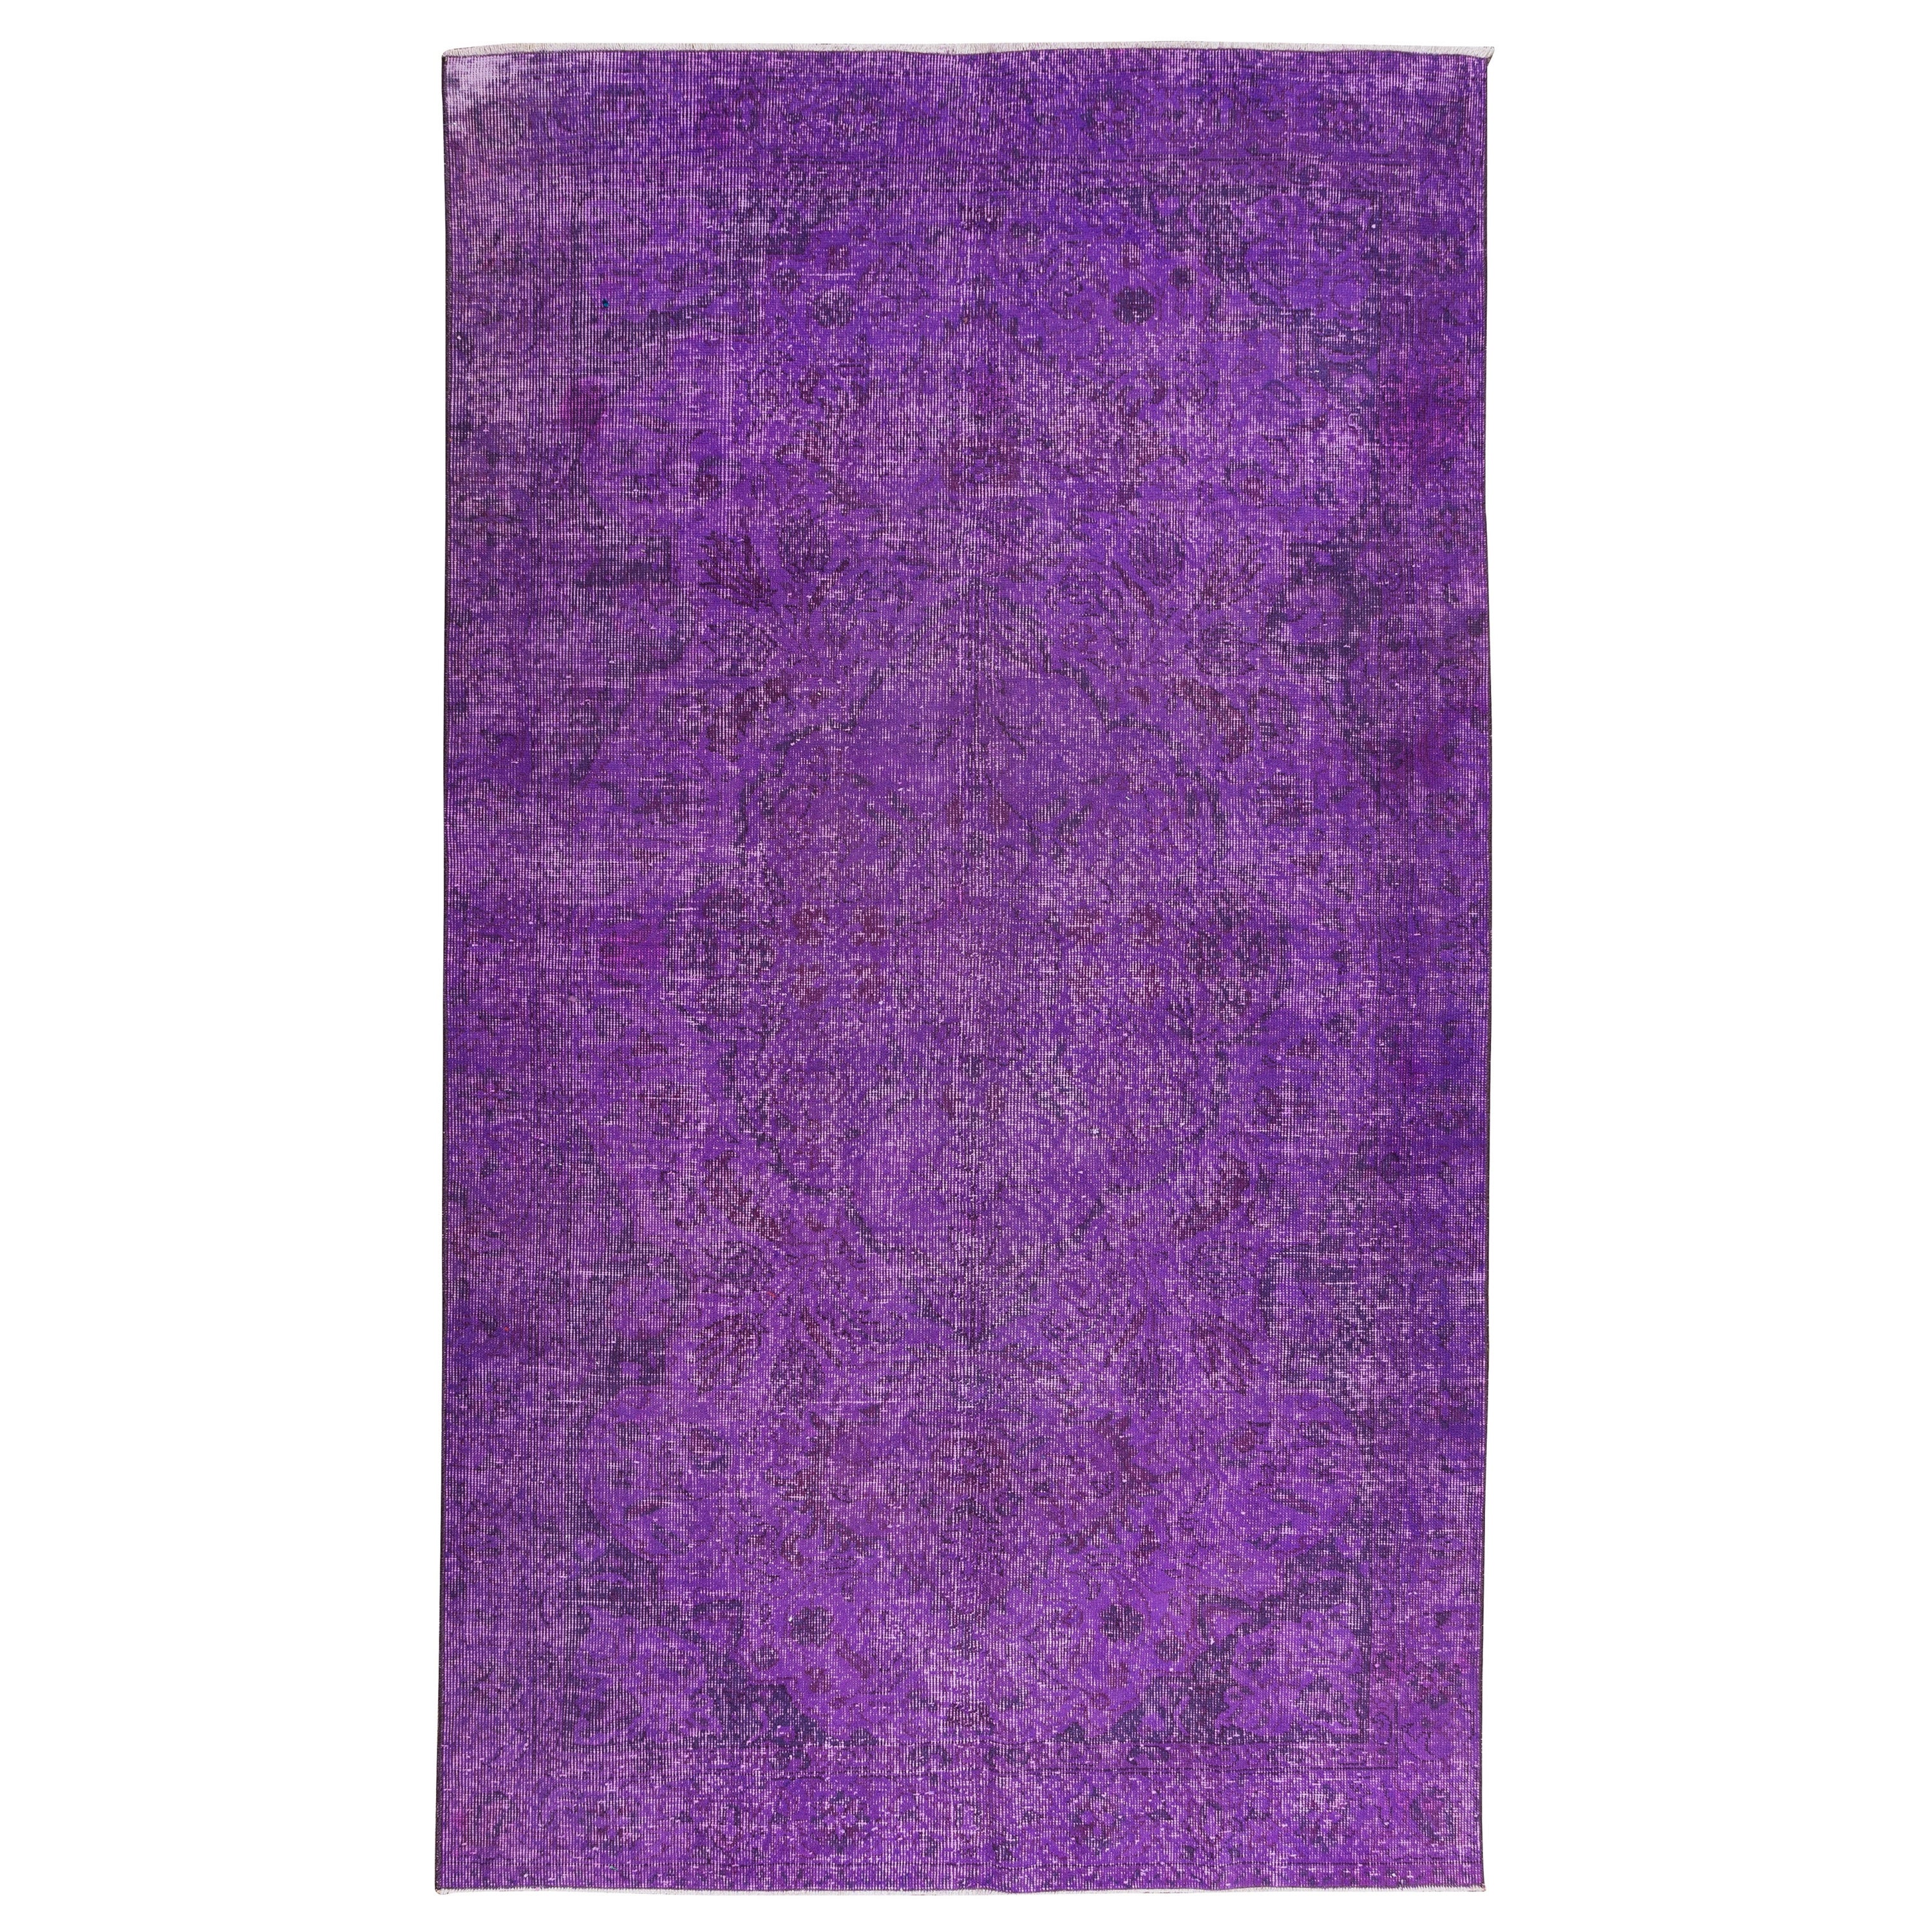 5x8.8 Ft Handmade Turkish Rug Over-Dyed in Purple, Modern Solid Pattern Carpet